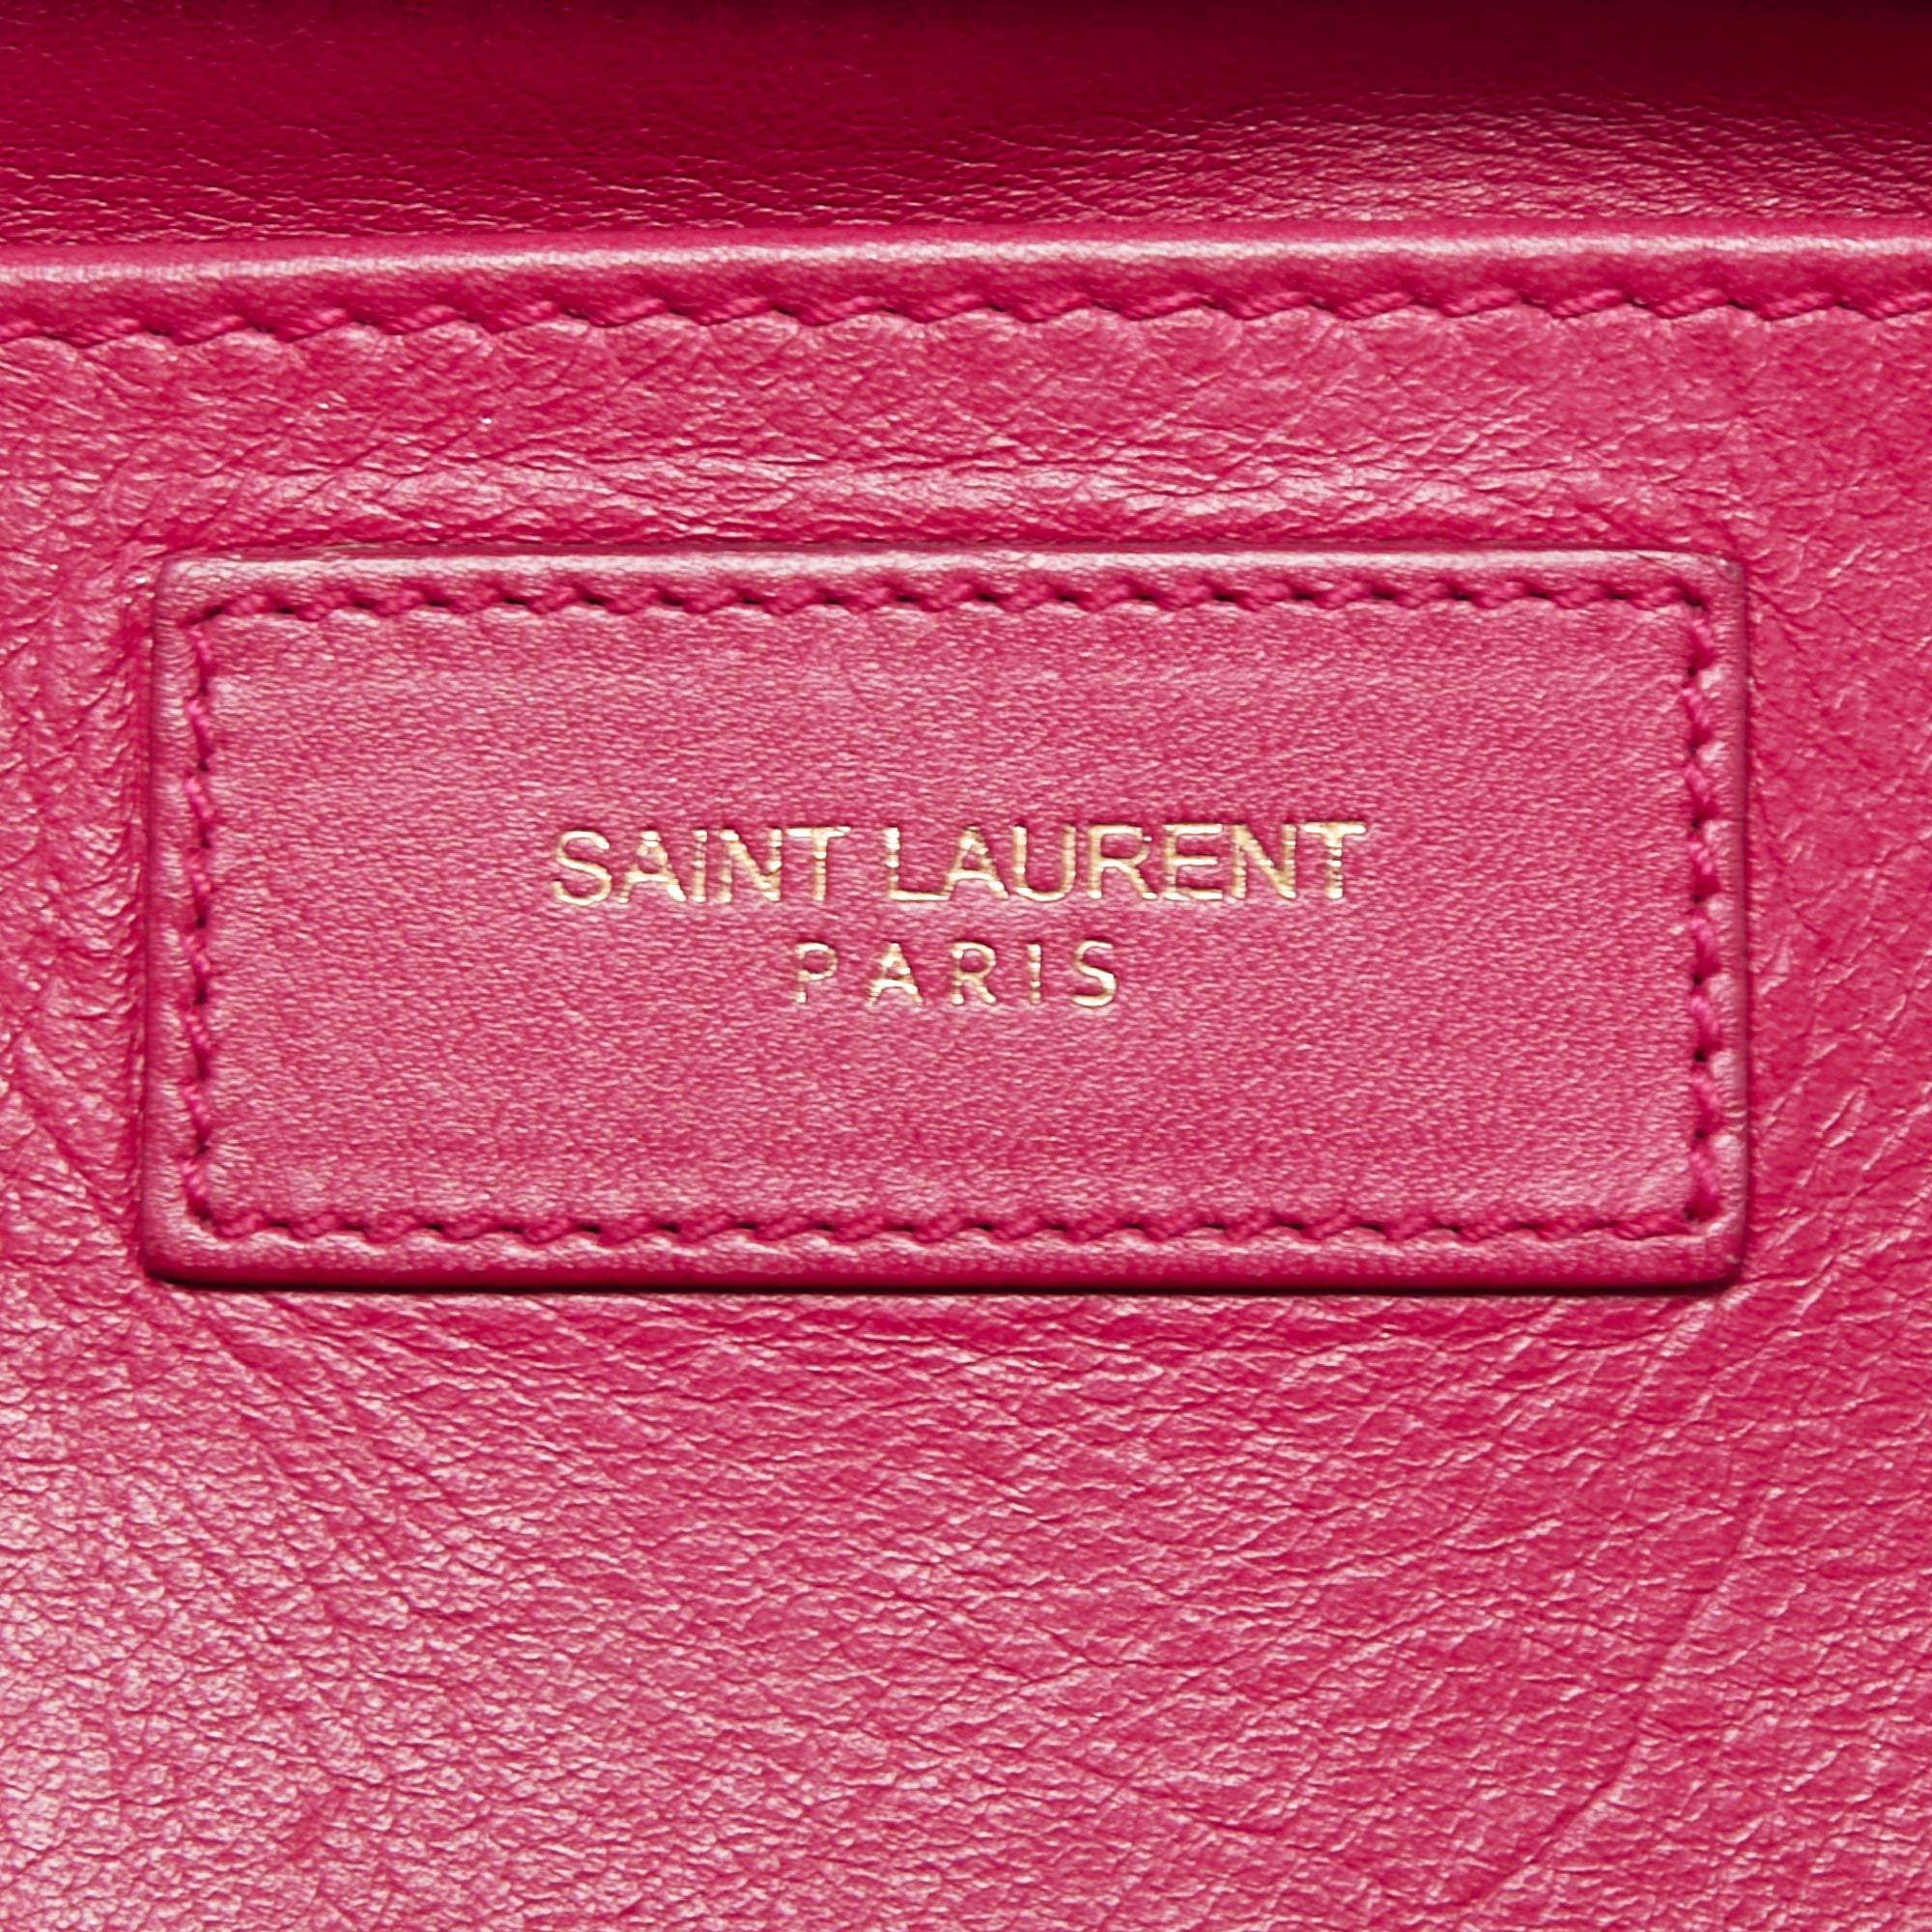 Saint Laurent Pink Grained Leather Small Cabas Chyc Tote For Sale 8